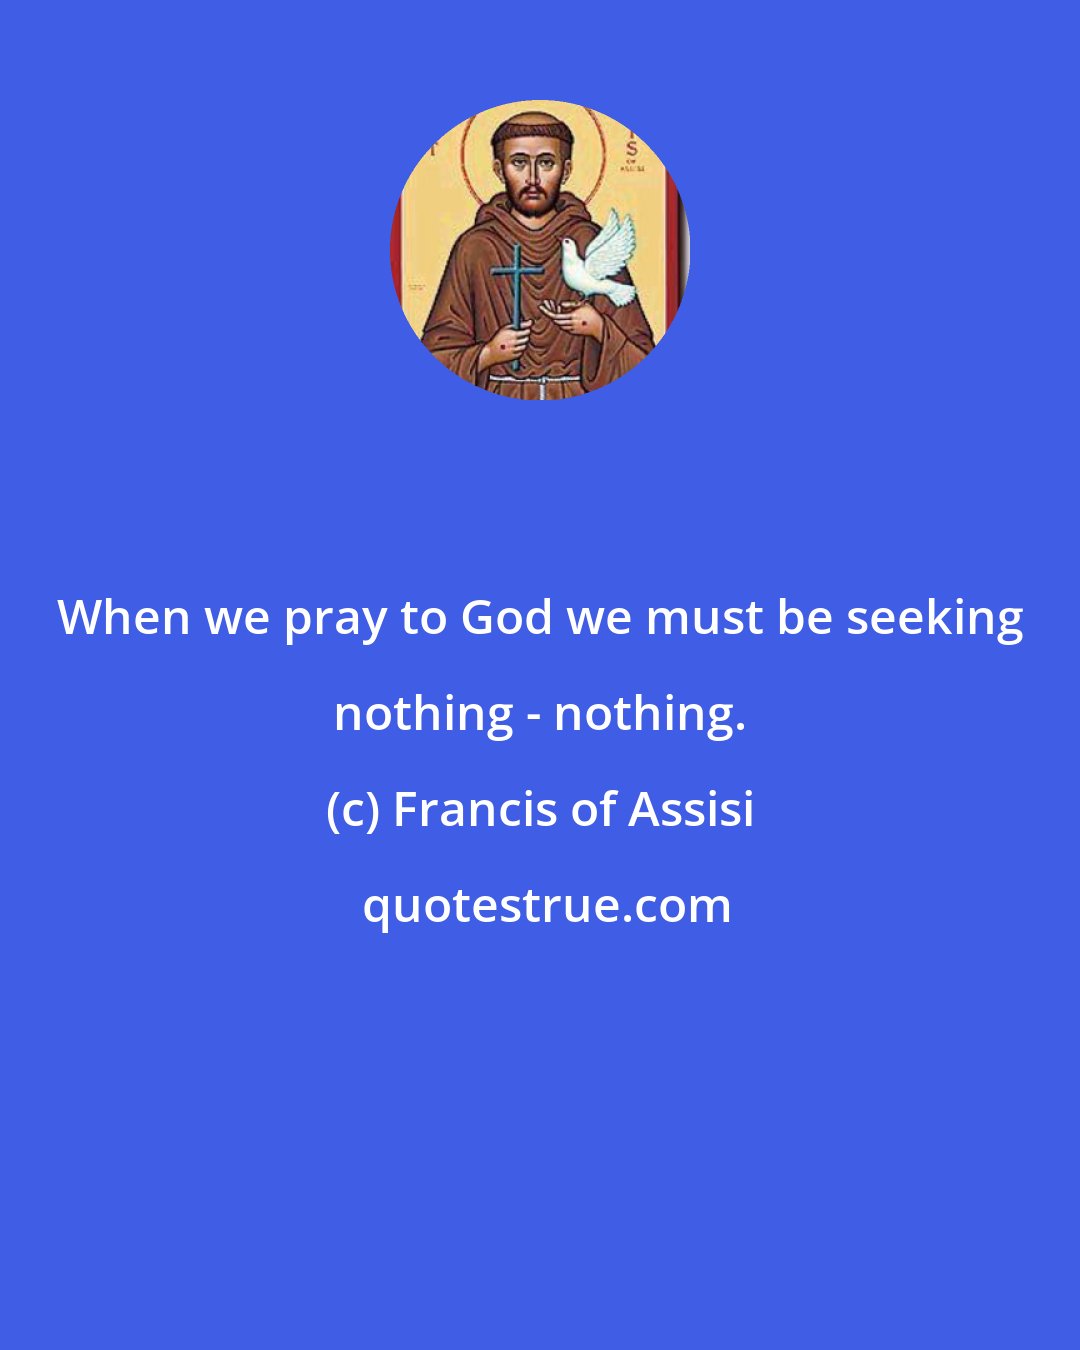 Francis of Assisi: When we pray to God we must be seeking nothing - nothing.